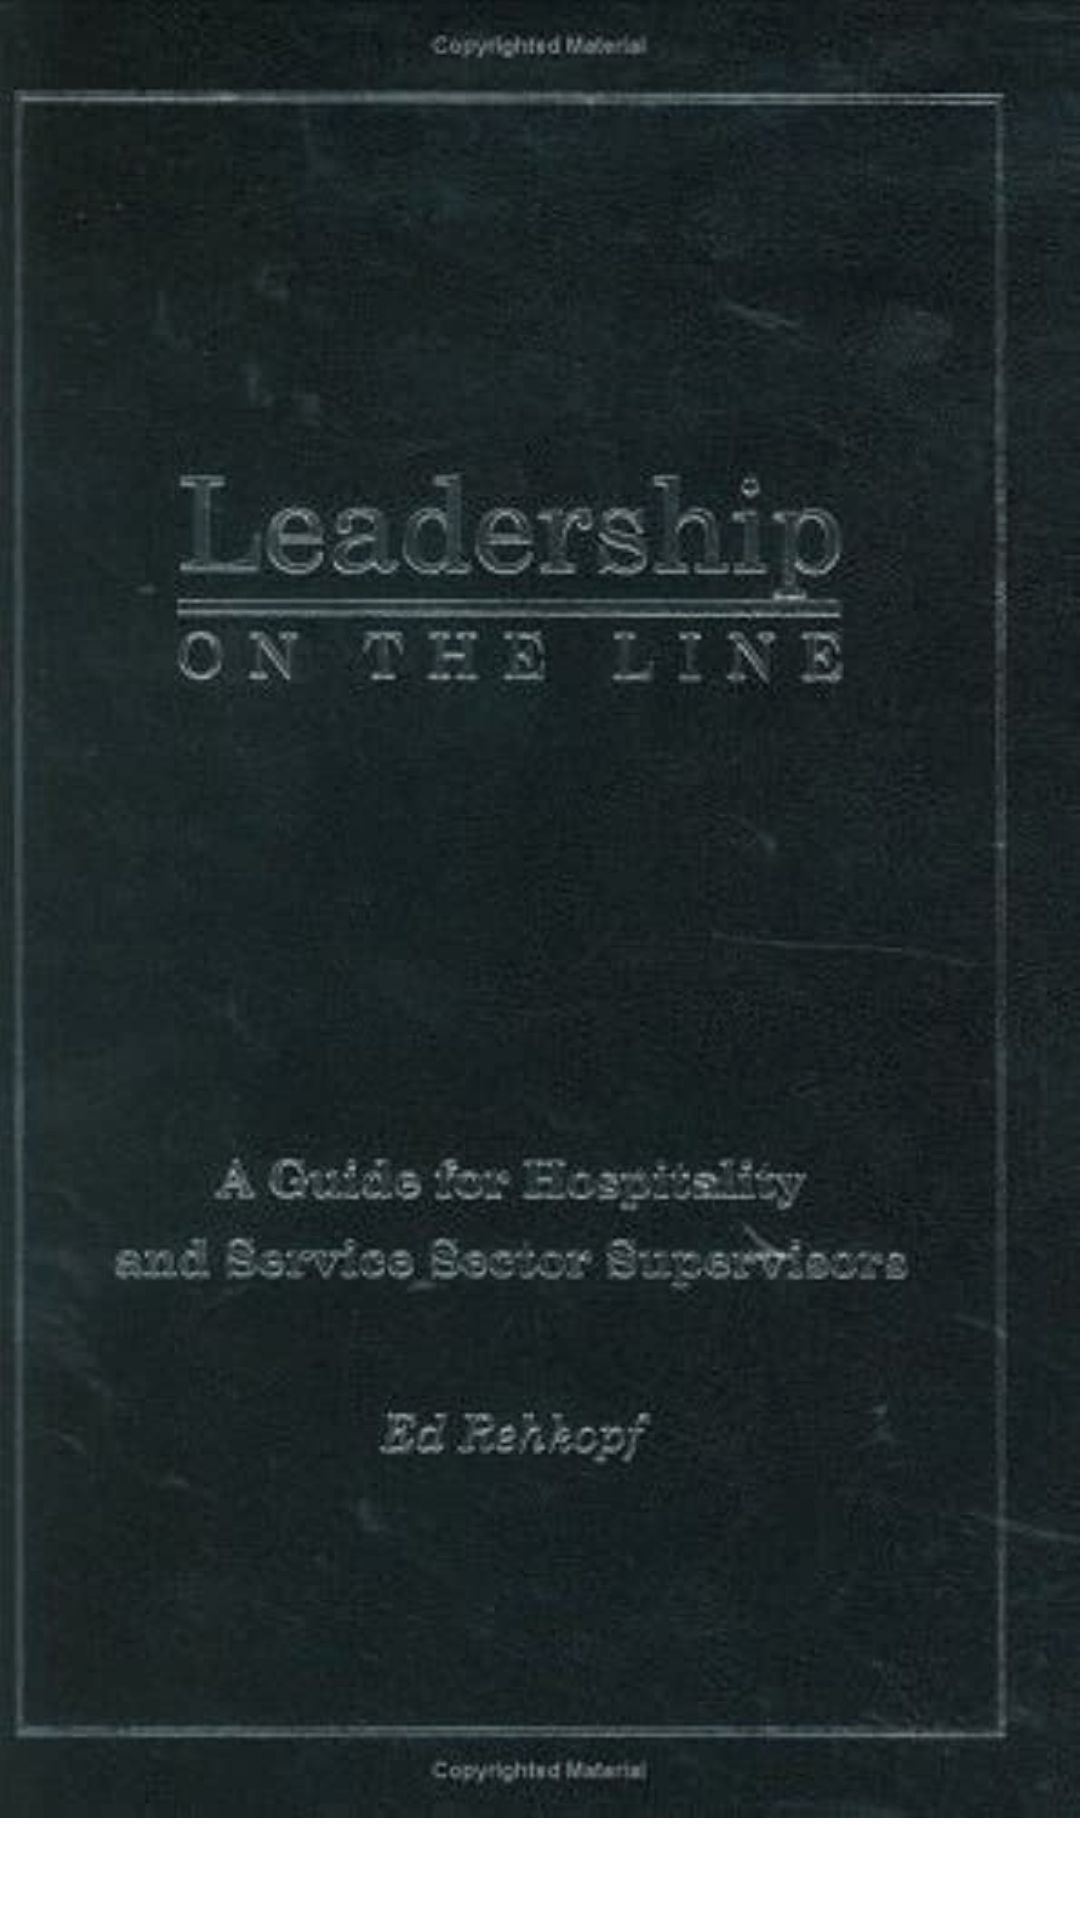 Leadership on the Line: A Guide for Hospitality and Service Sector Supervisors